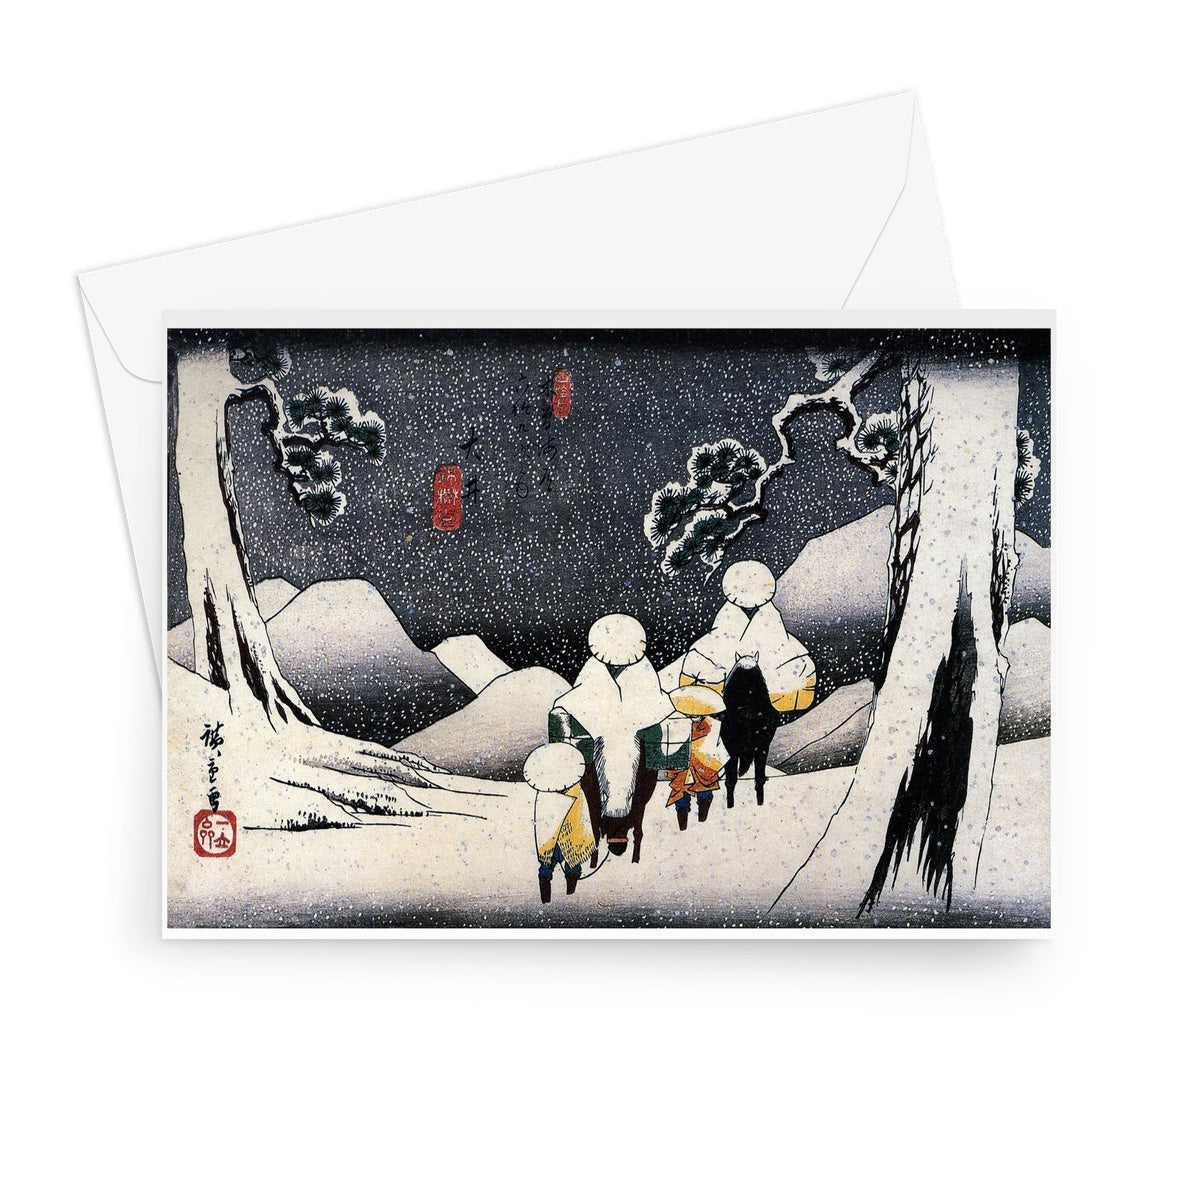 Travellers on Horseback in the Snow, c.1835 - Greeting Card